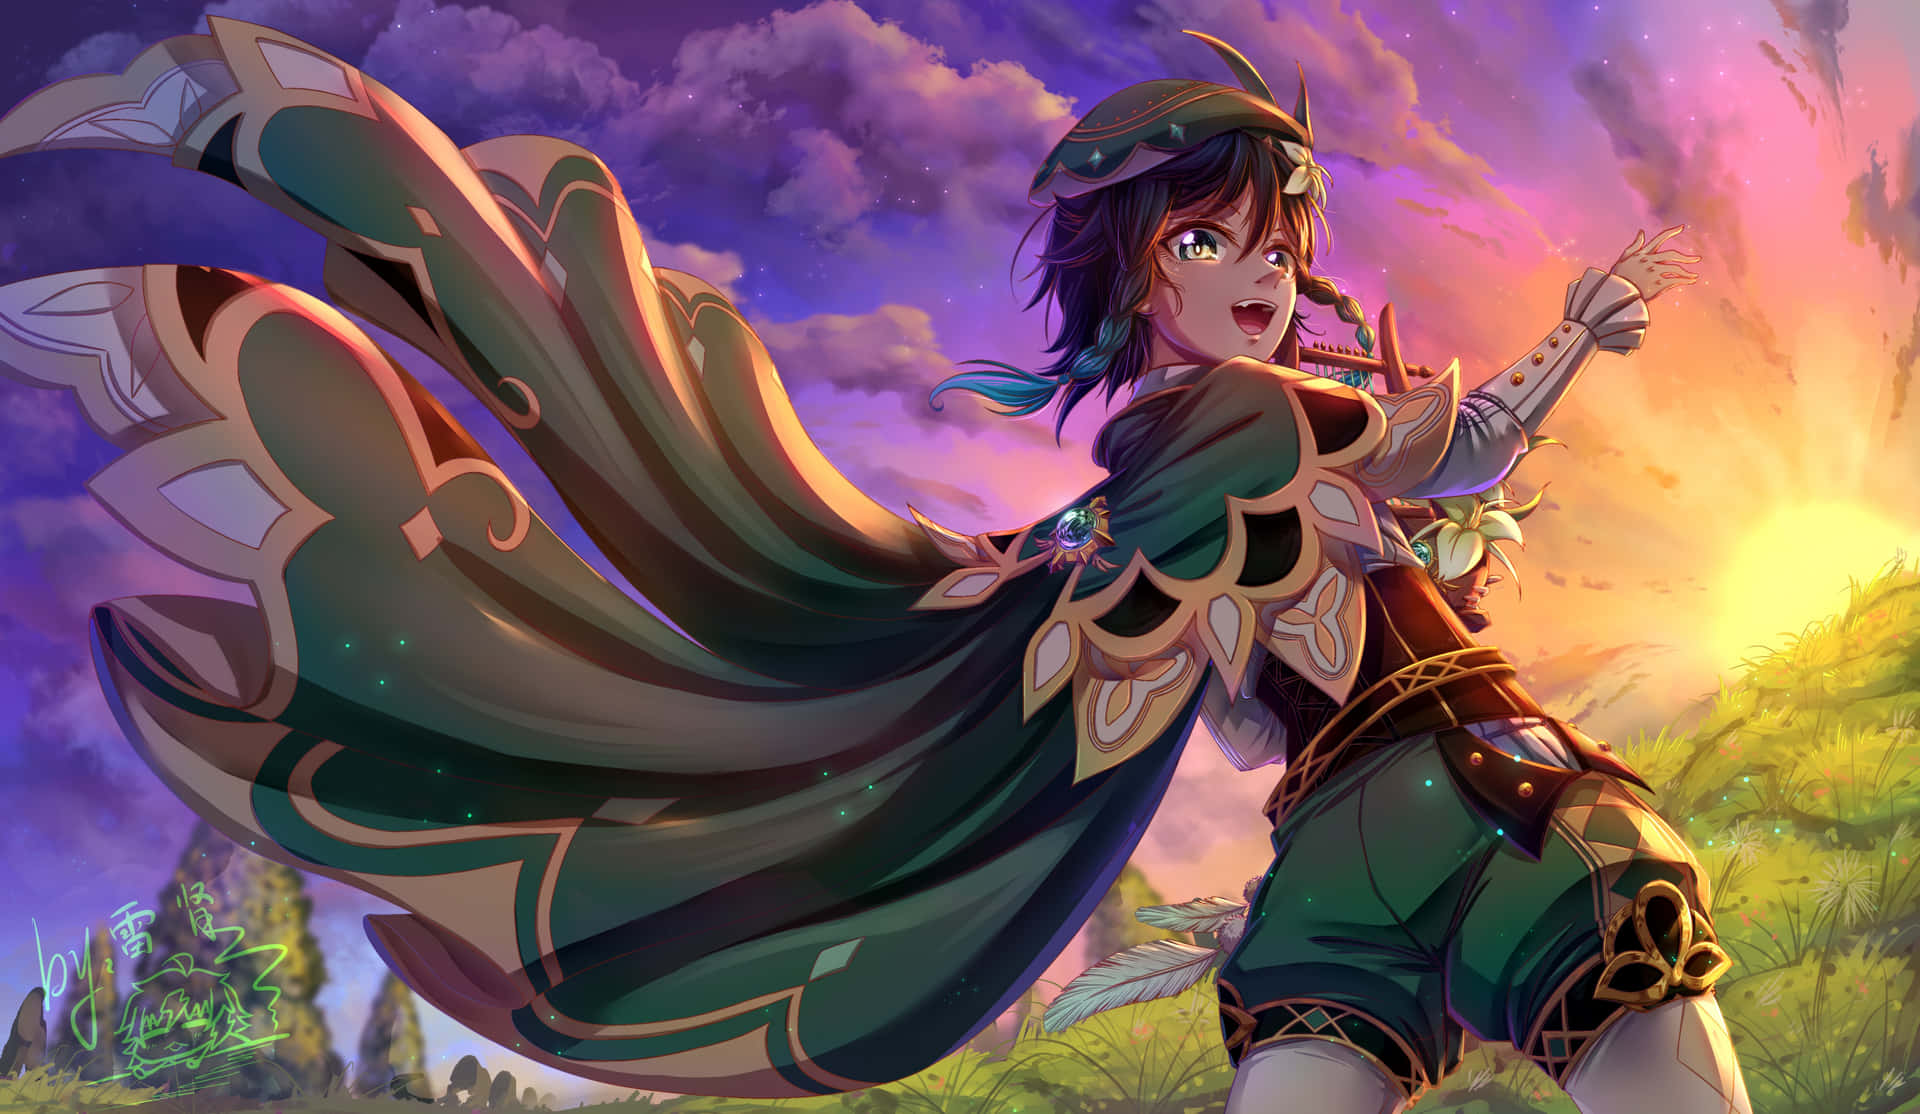 A Girl In Green With A Cape And A Sword